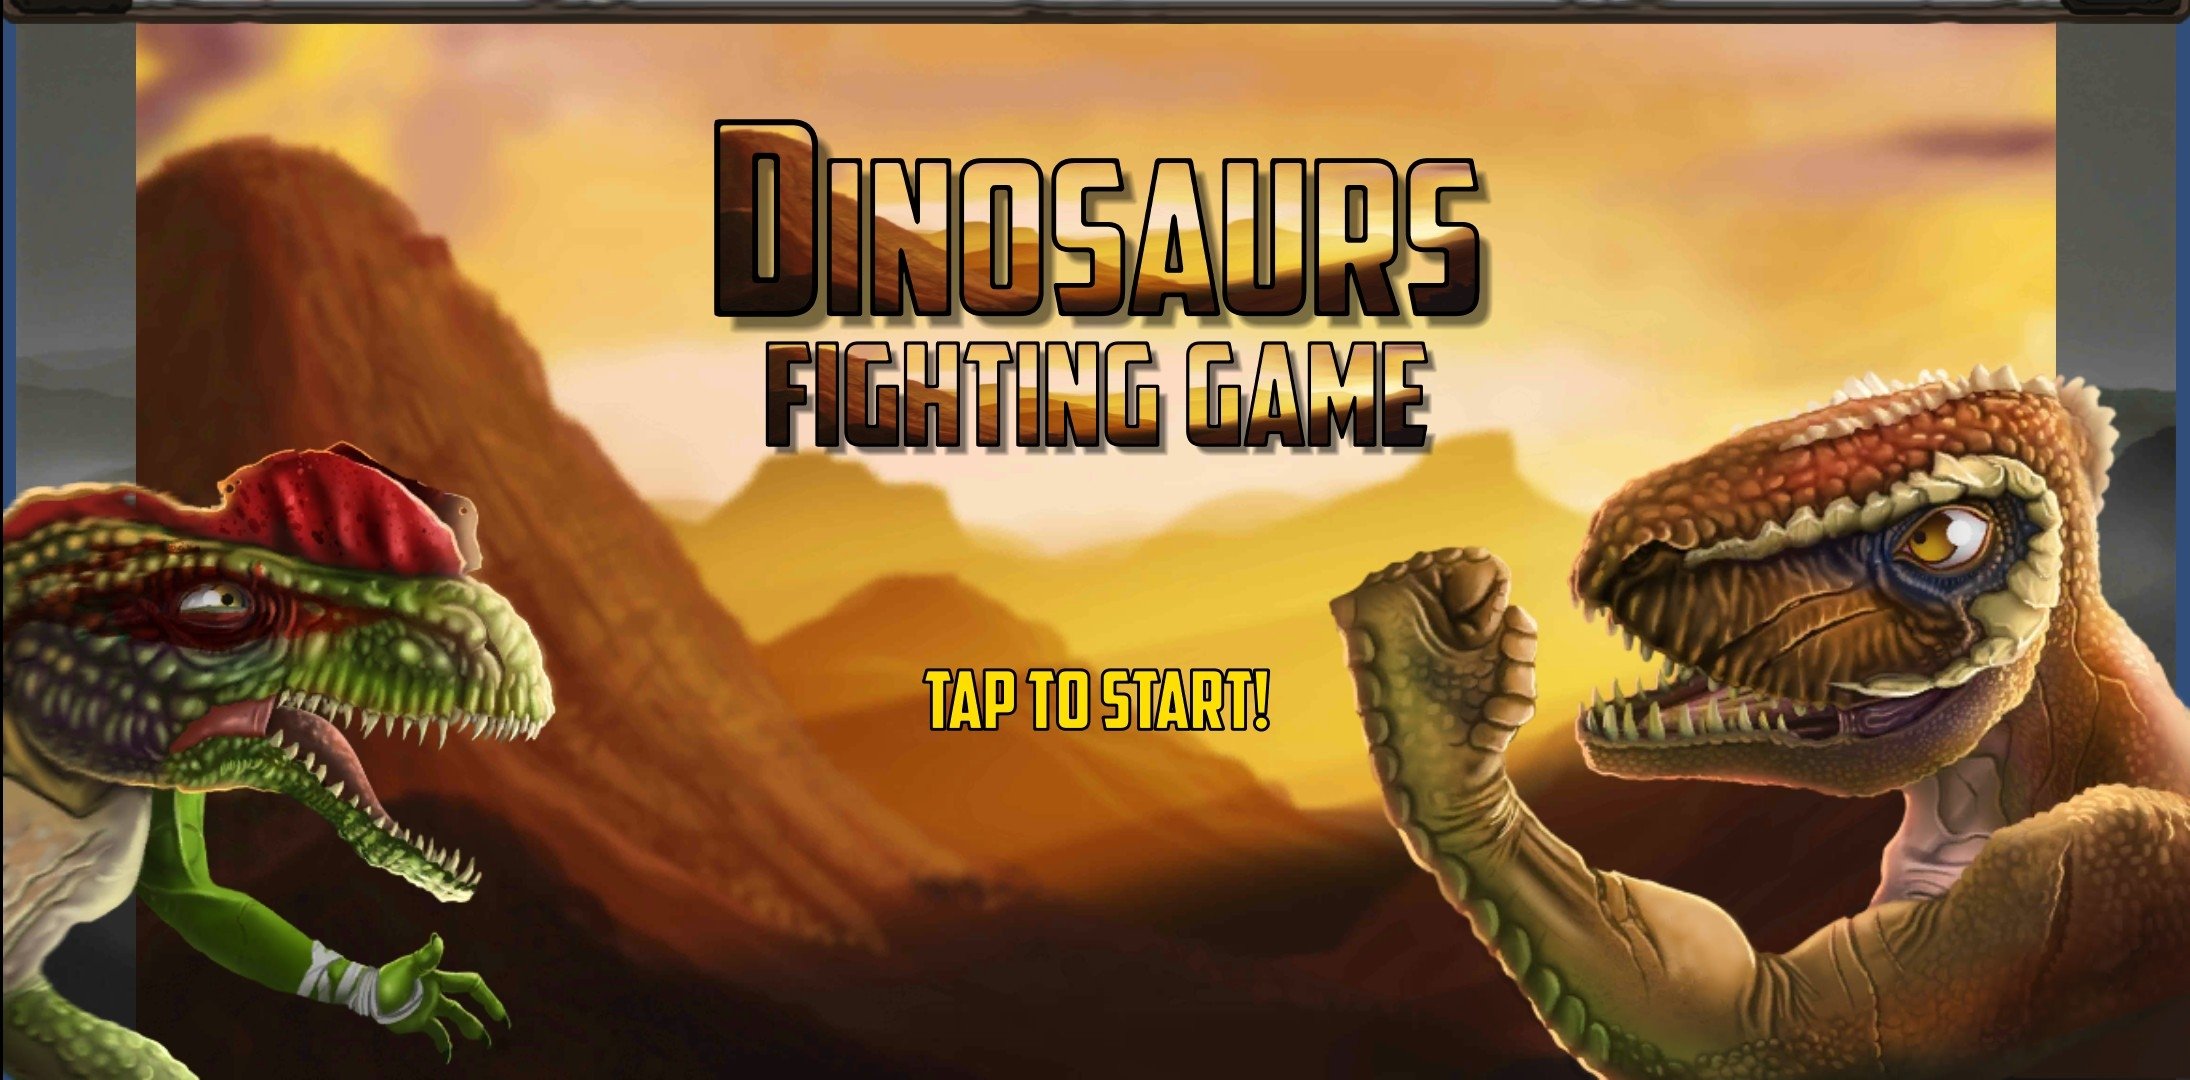 Download Dinosaur games for Android - Best free Dinosaurs games APK